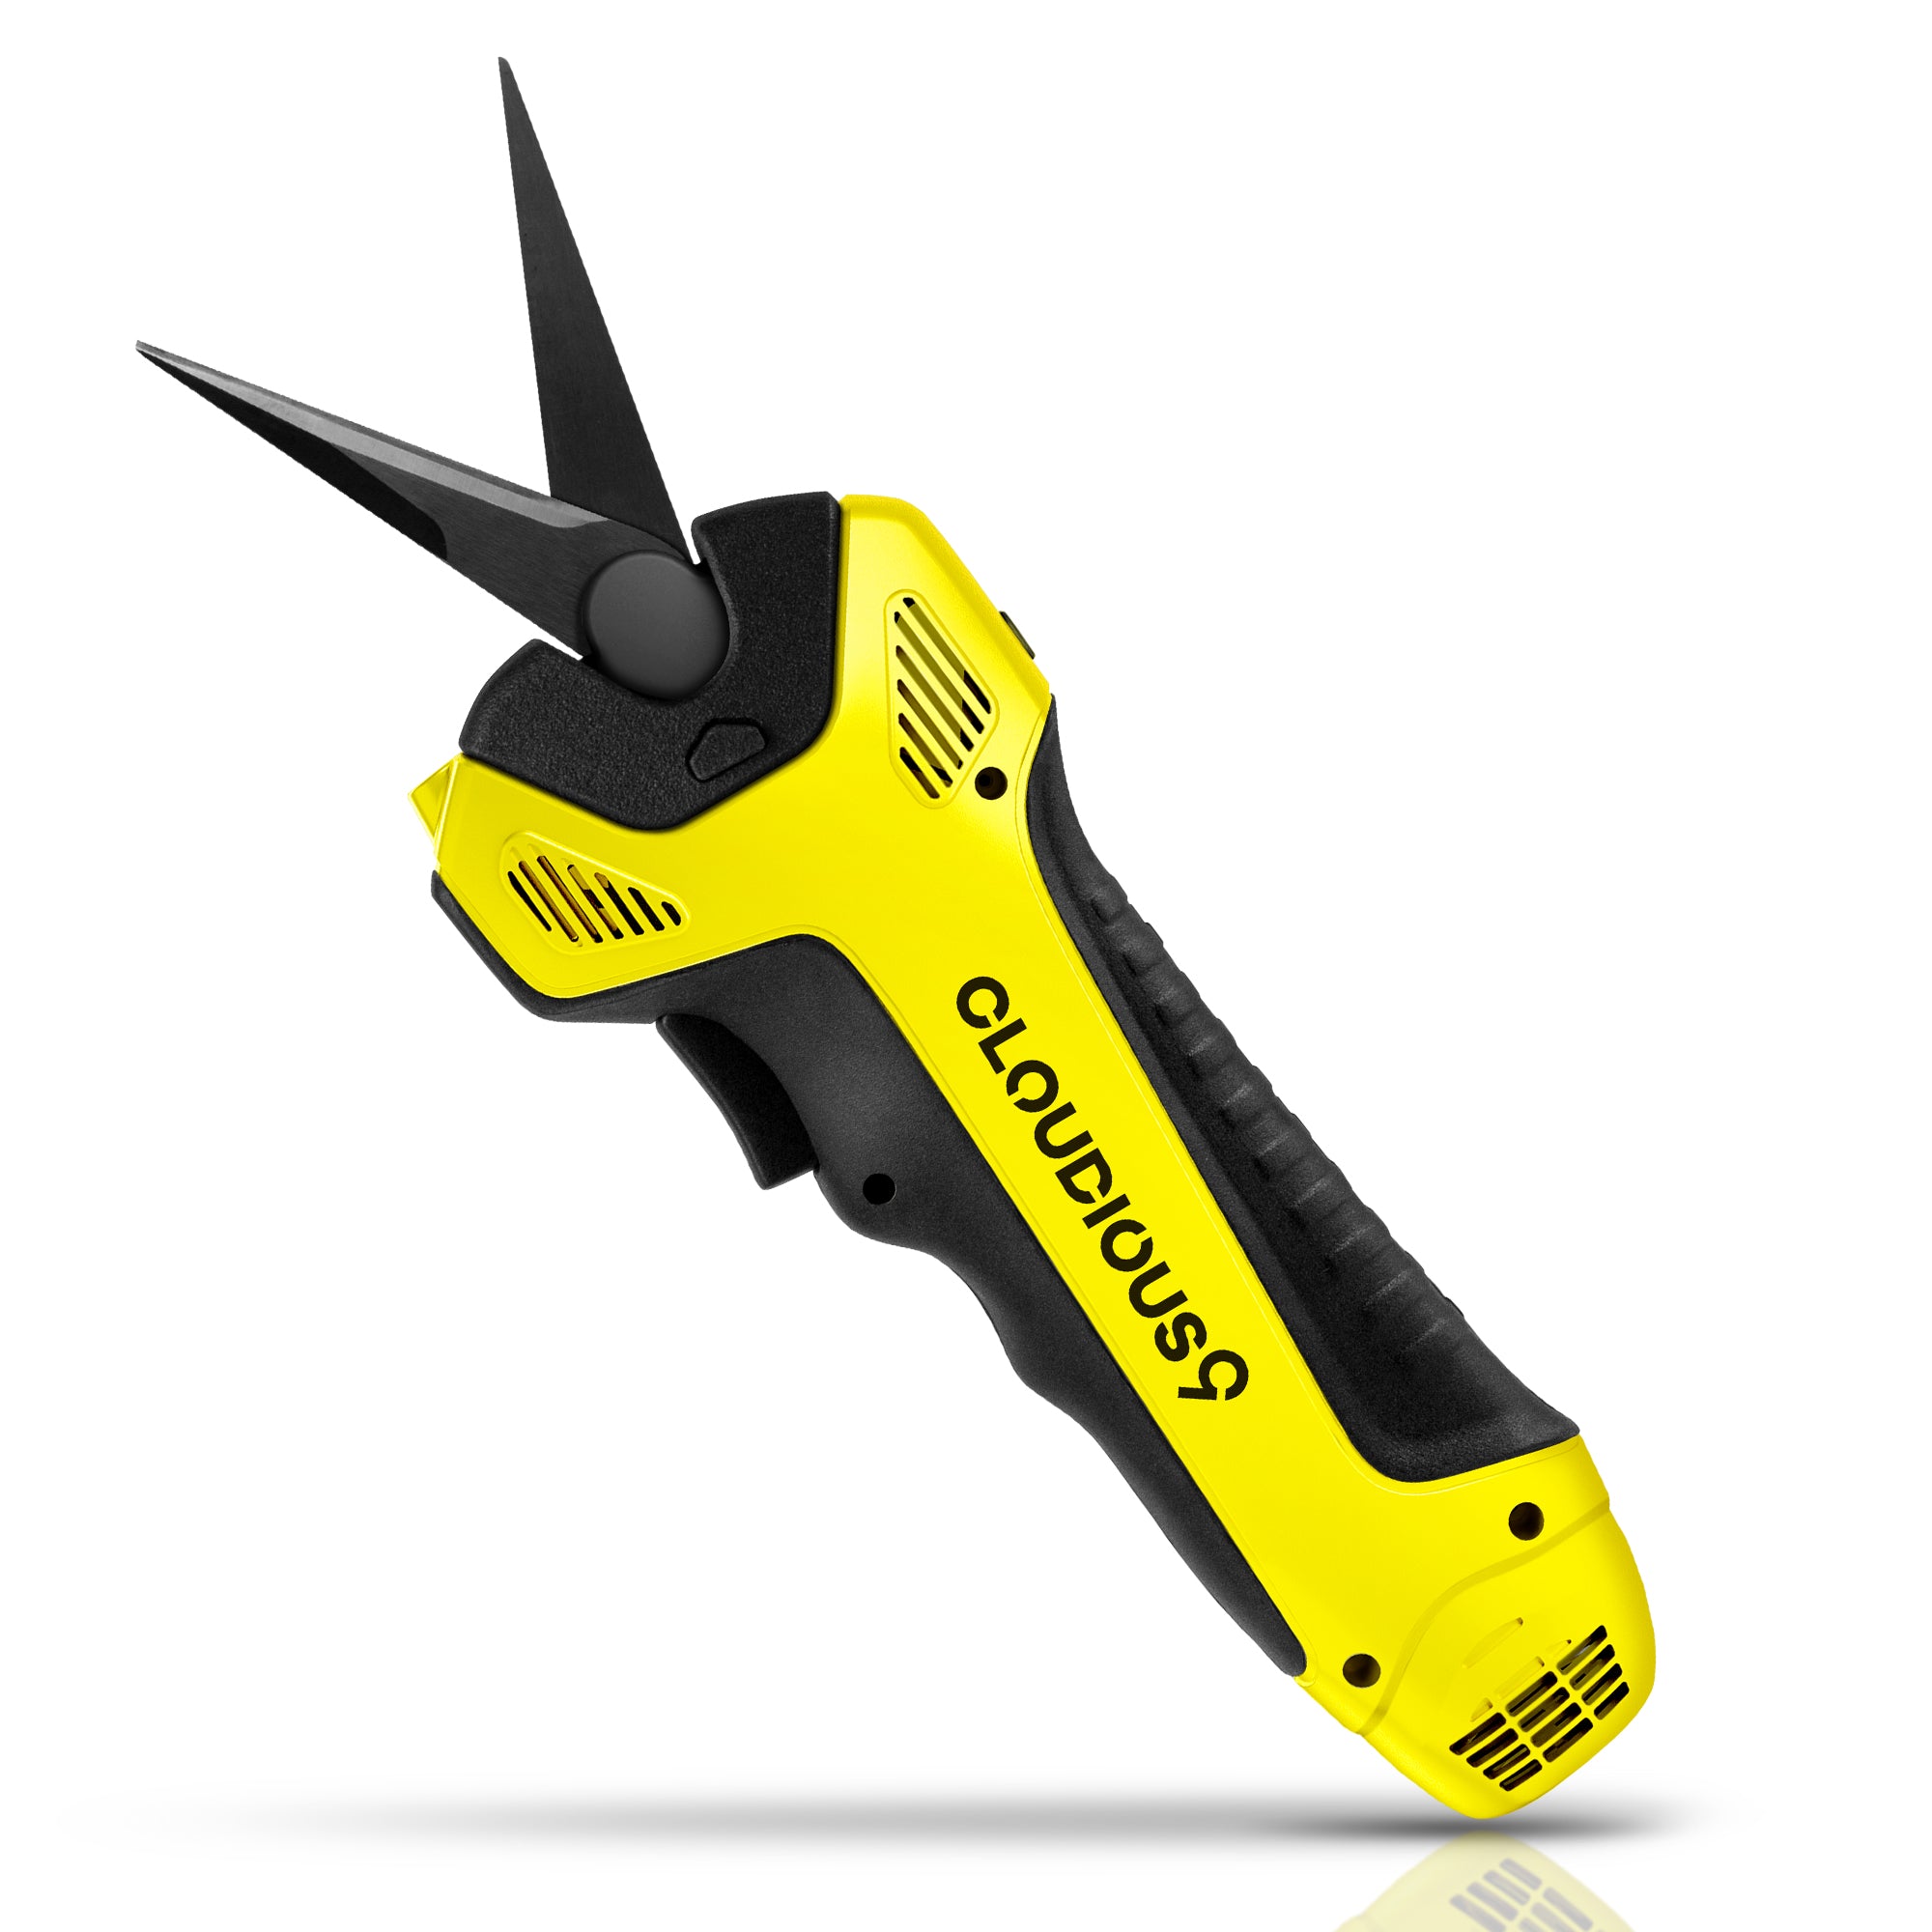 Yellow and black automatic trimmers from Cloudious9. An electric update on small handheld gardening shears.